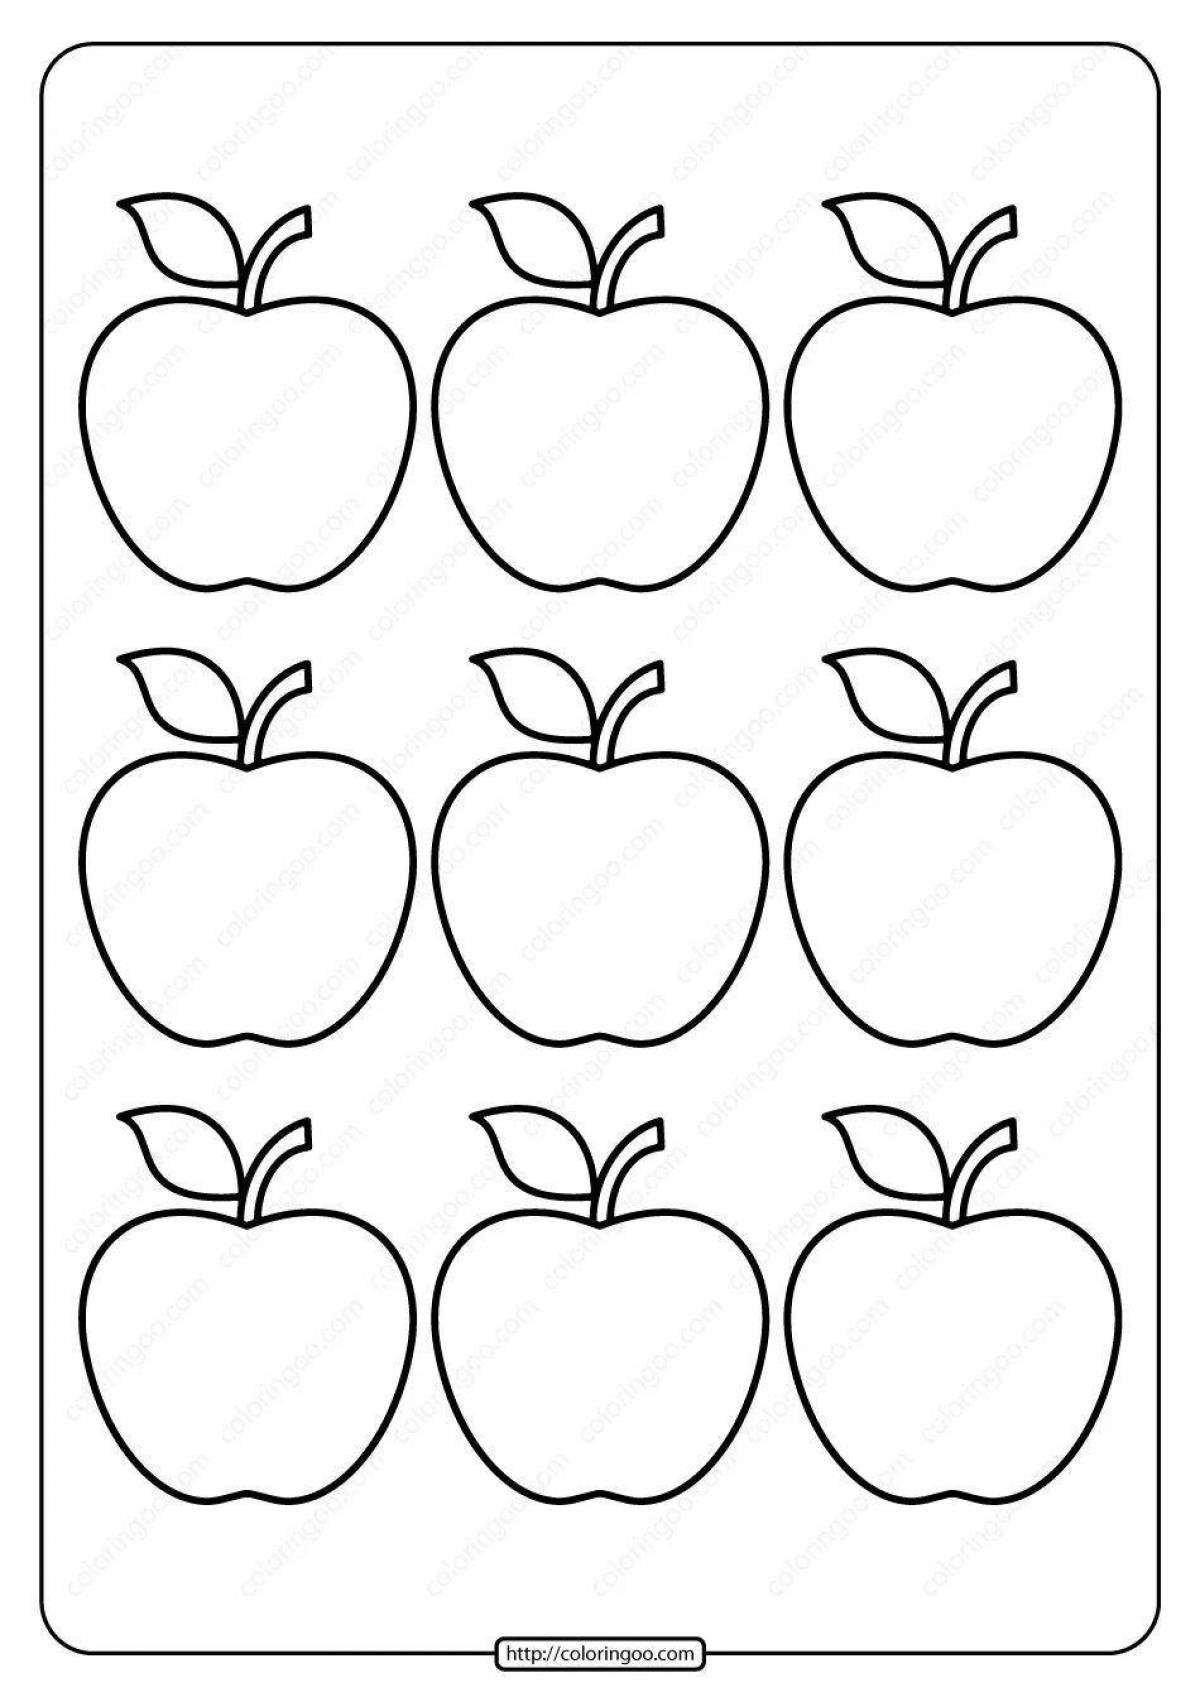 Fascinating apple pattern coloring page